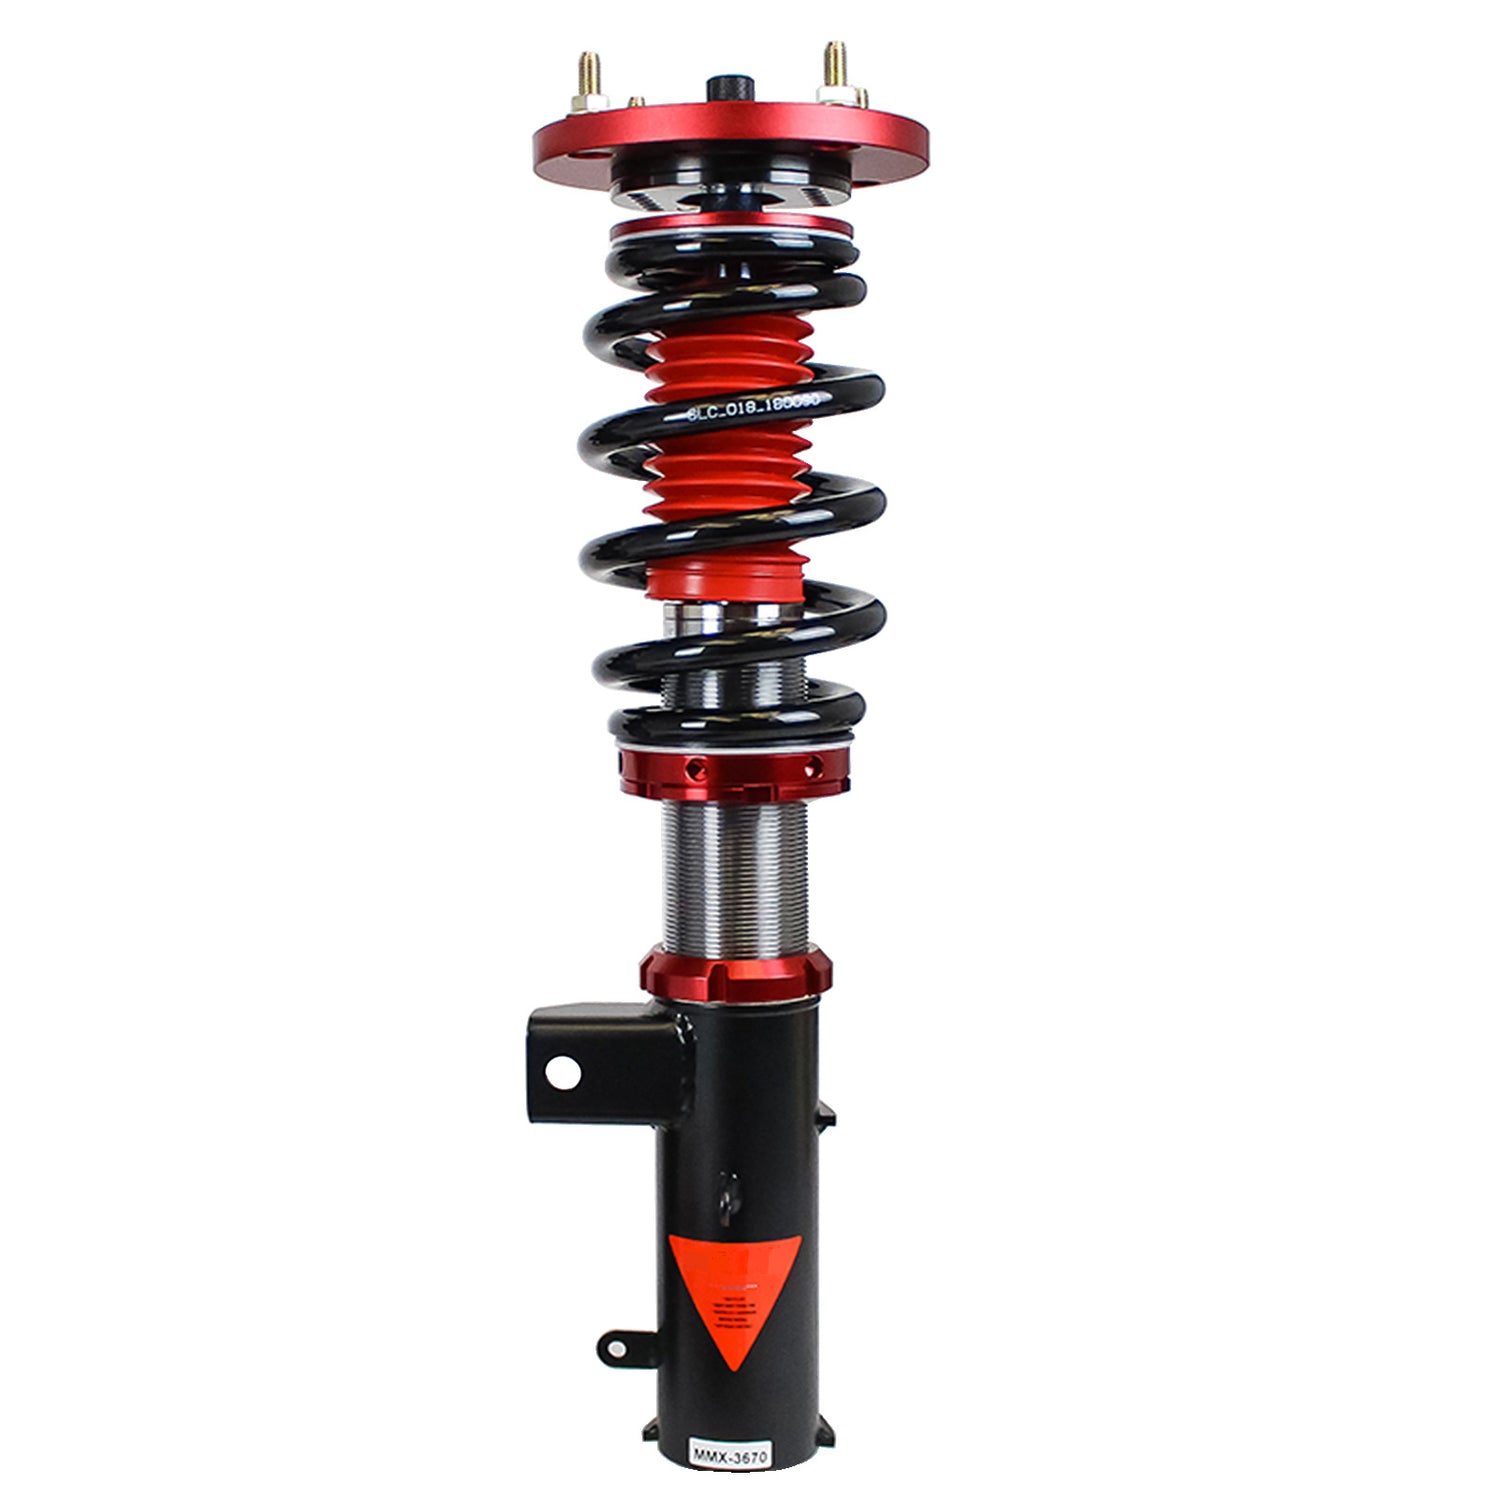 MMX3670 MAXX Coilovers Lowering Kit, Fully Adjustable, Ride Height, 40 Clicks Rebound Settings, Ford Mustang 05-14